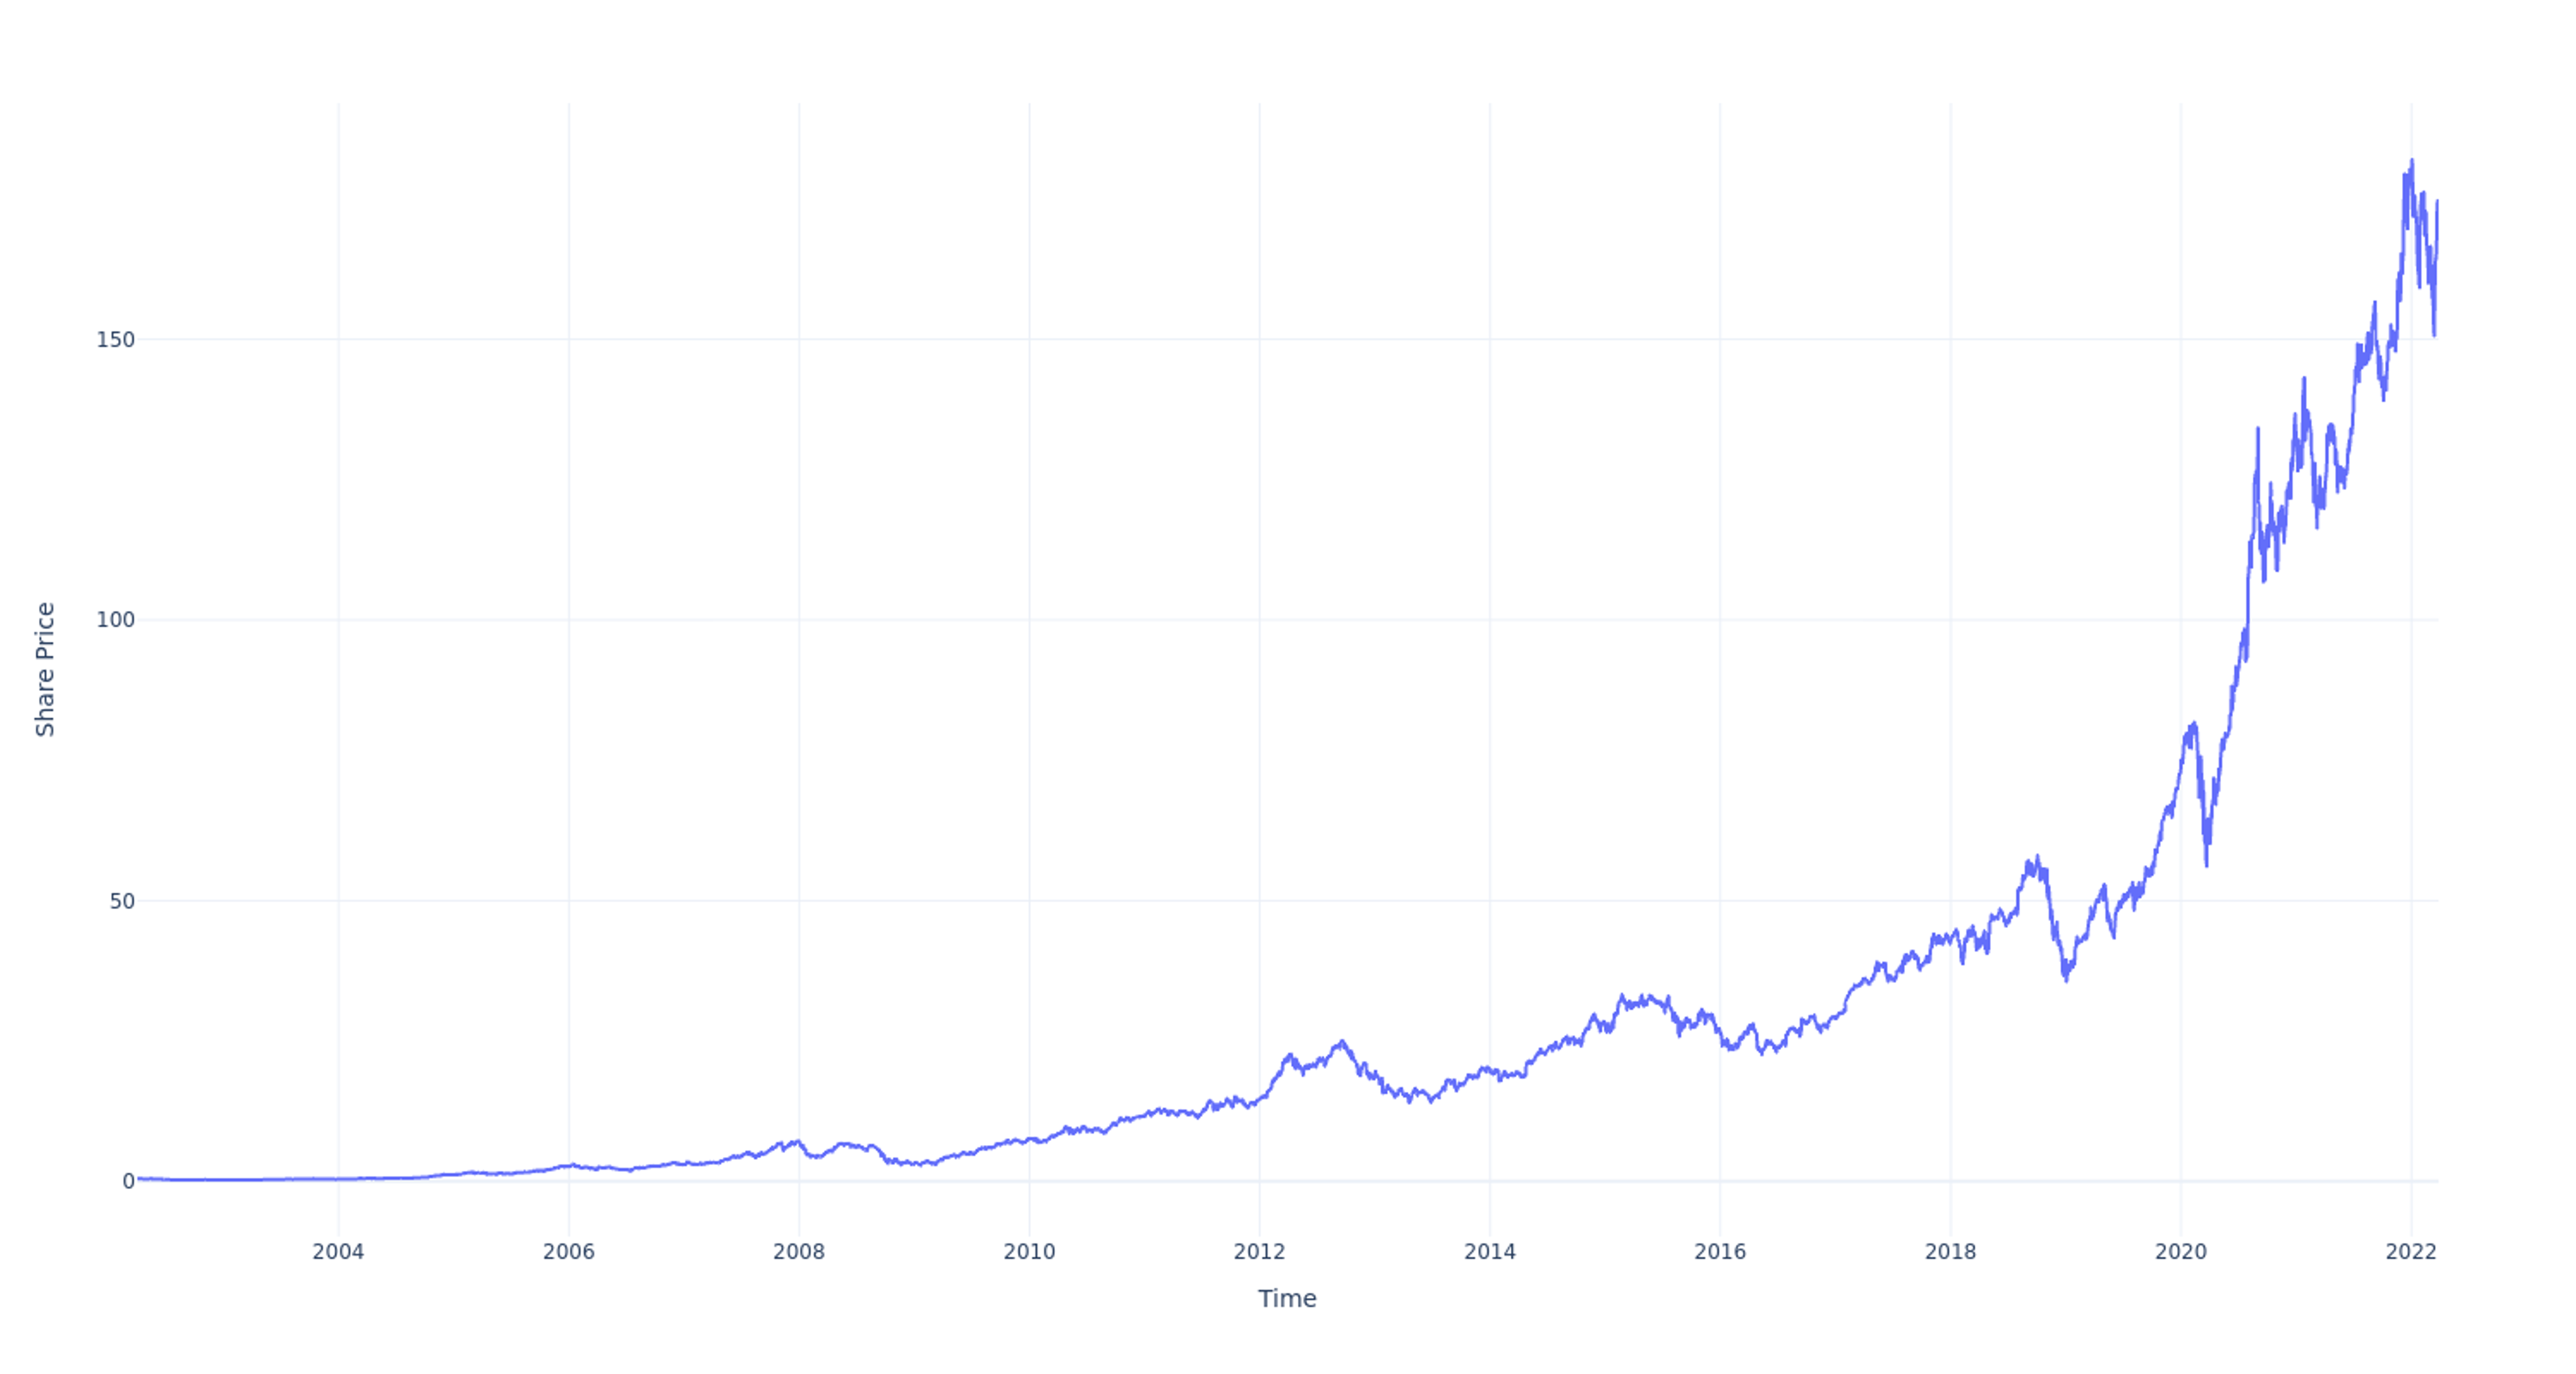 If You Invested 100 In Apple 20 Years Ago, Here's How Much You Would